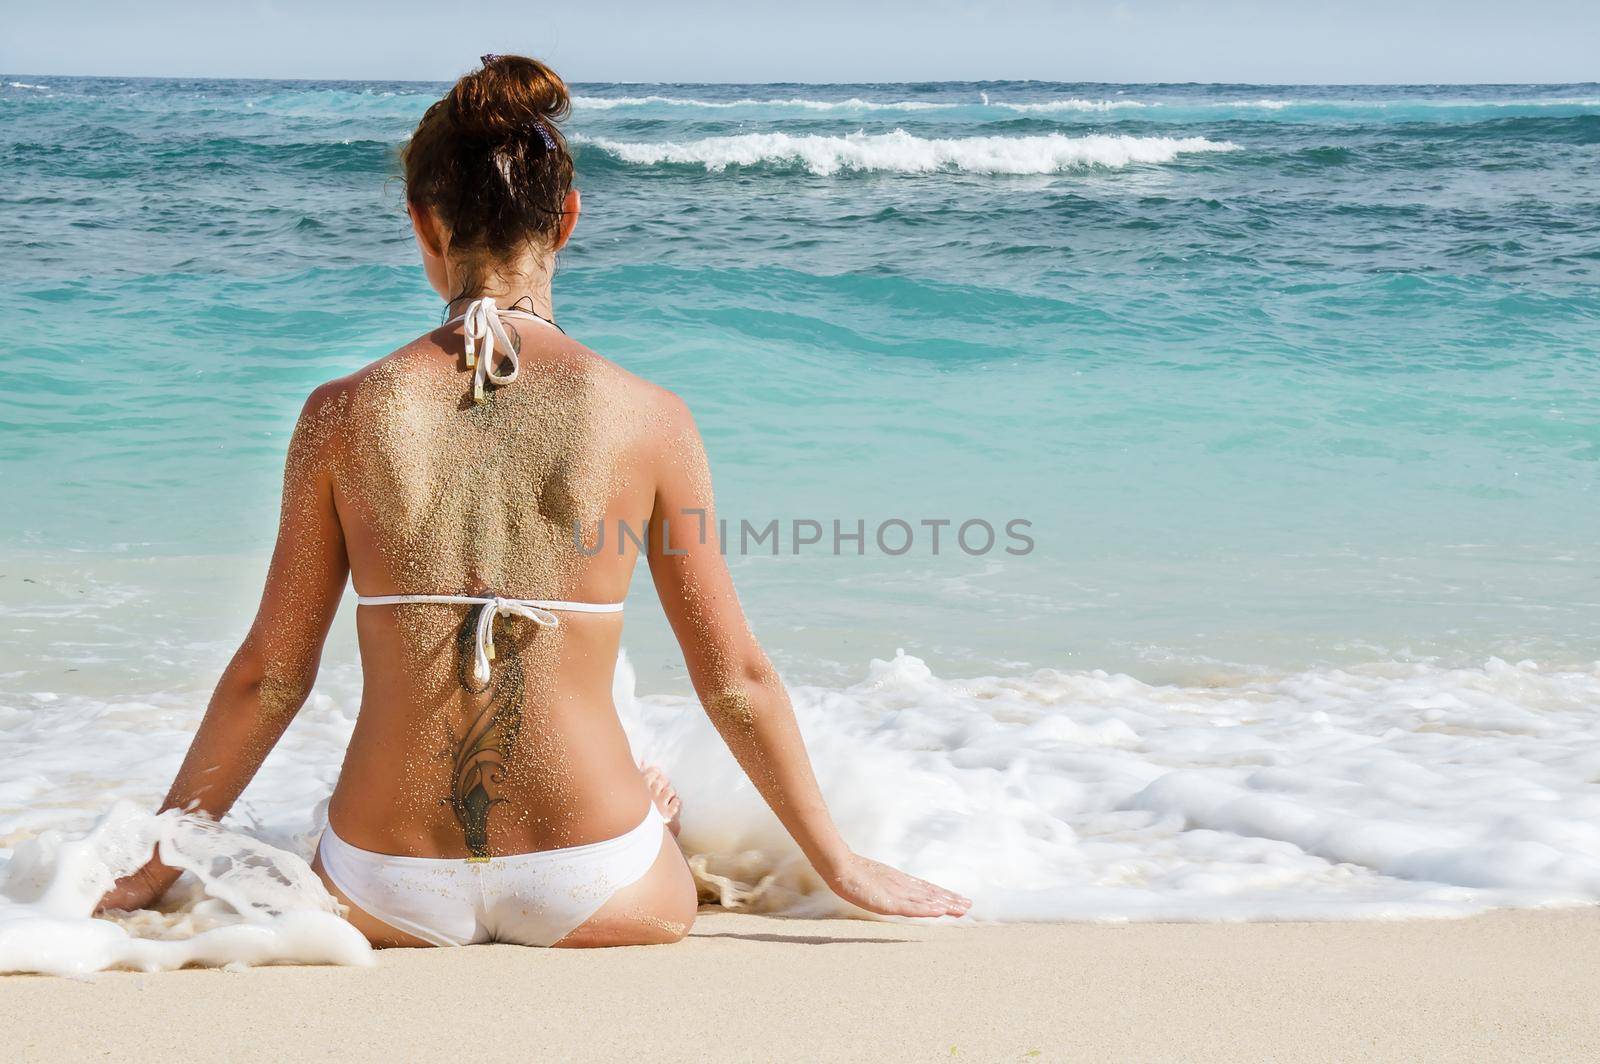 Tanned young girl sitting on the beach - Stock image by Jyliana